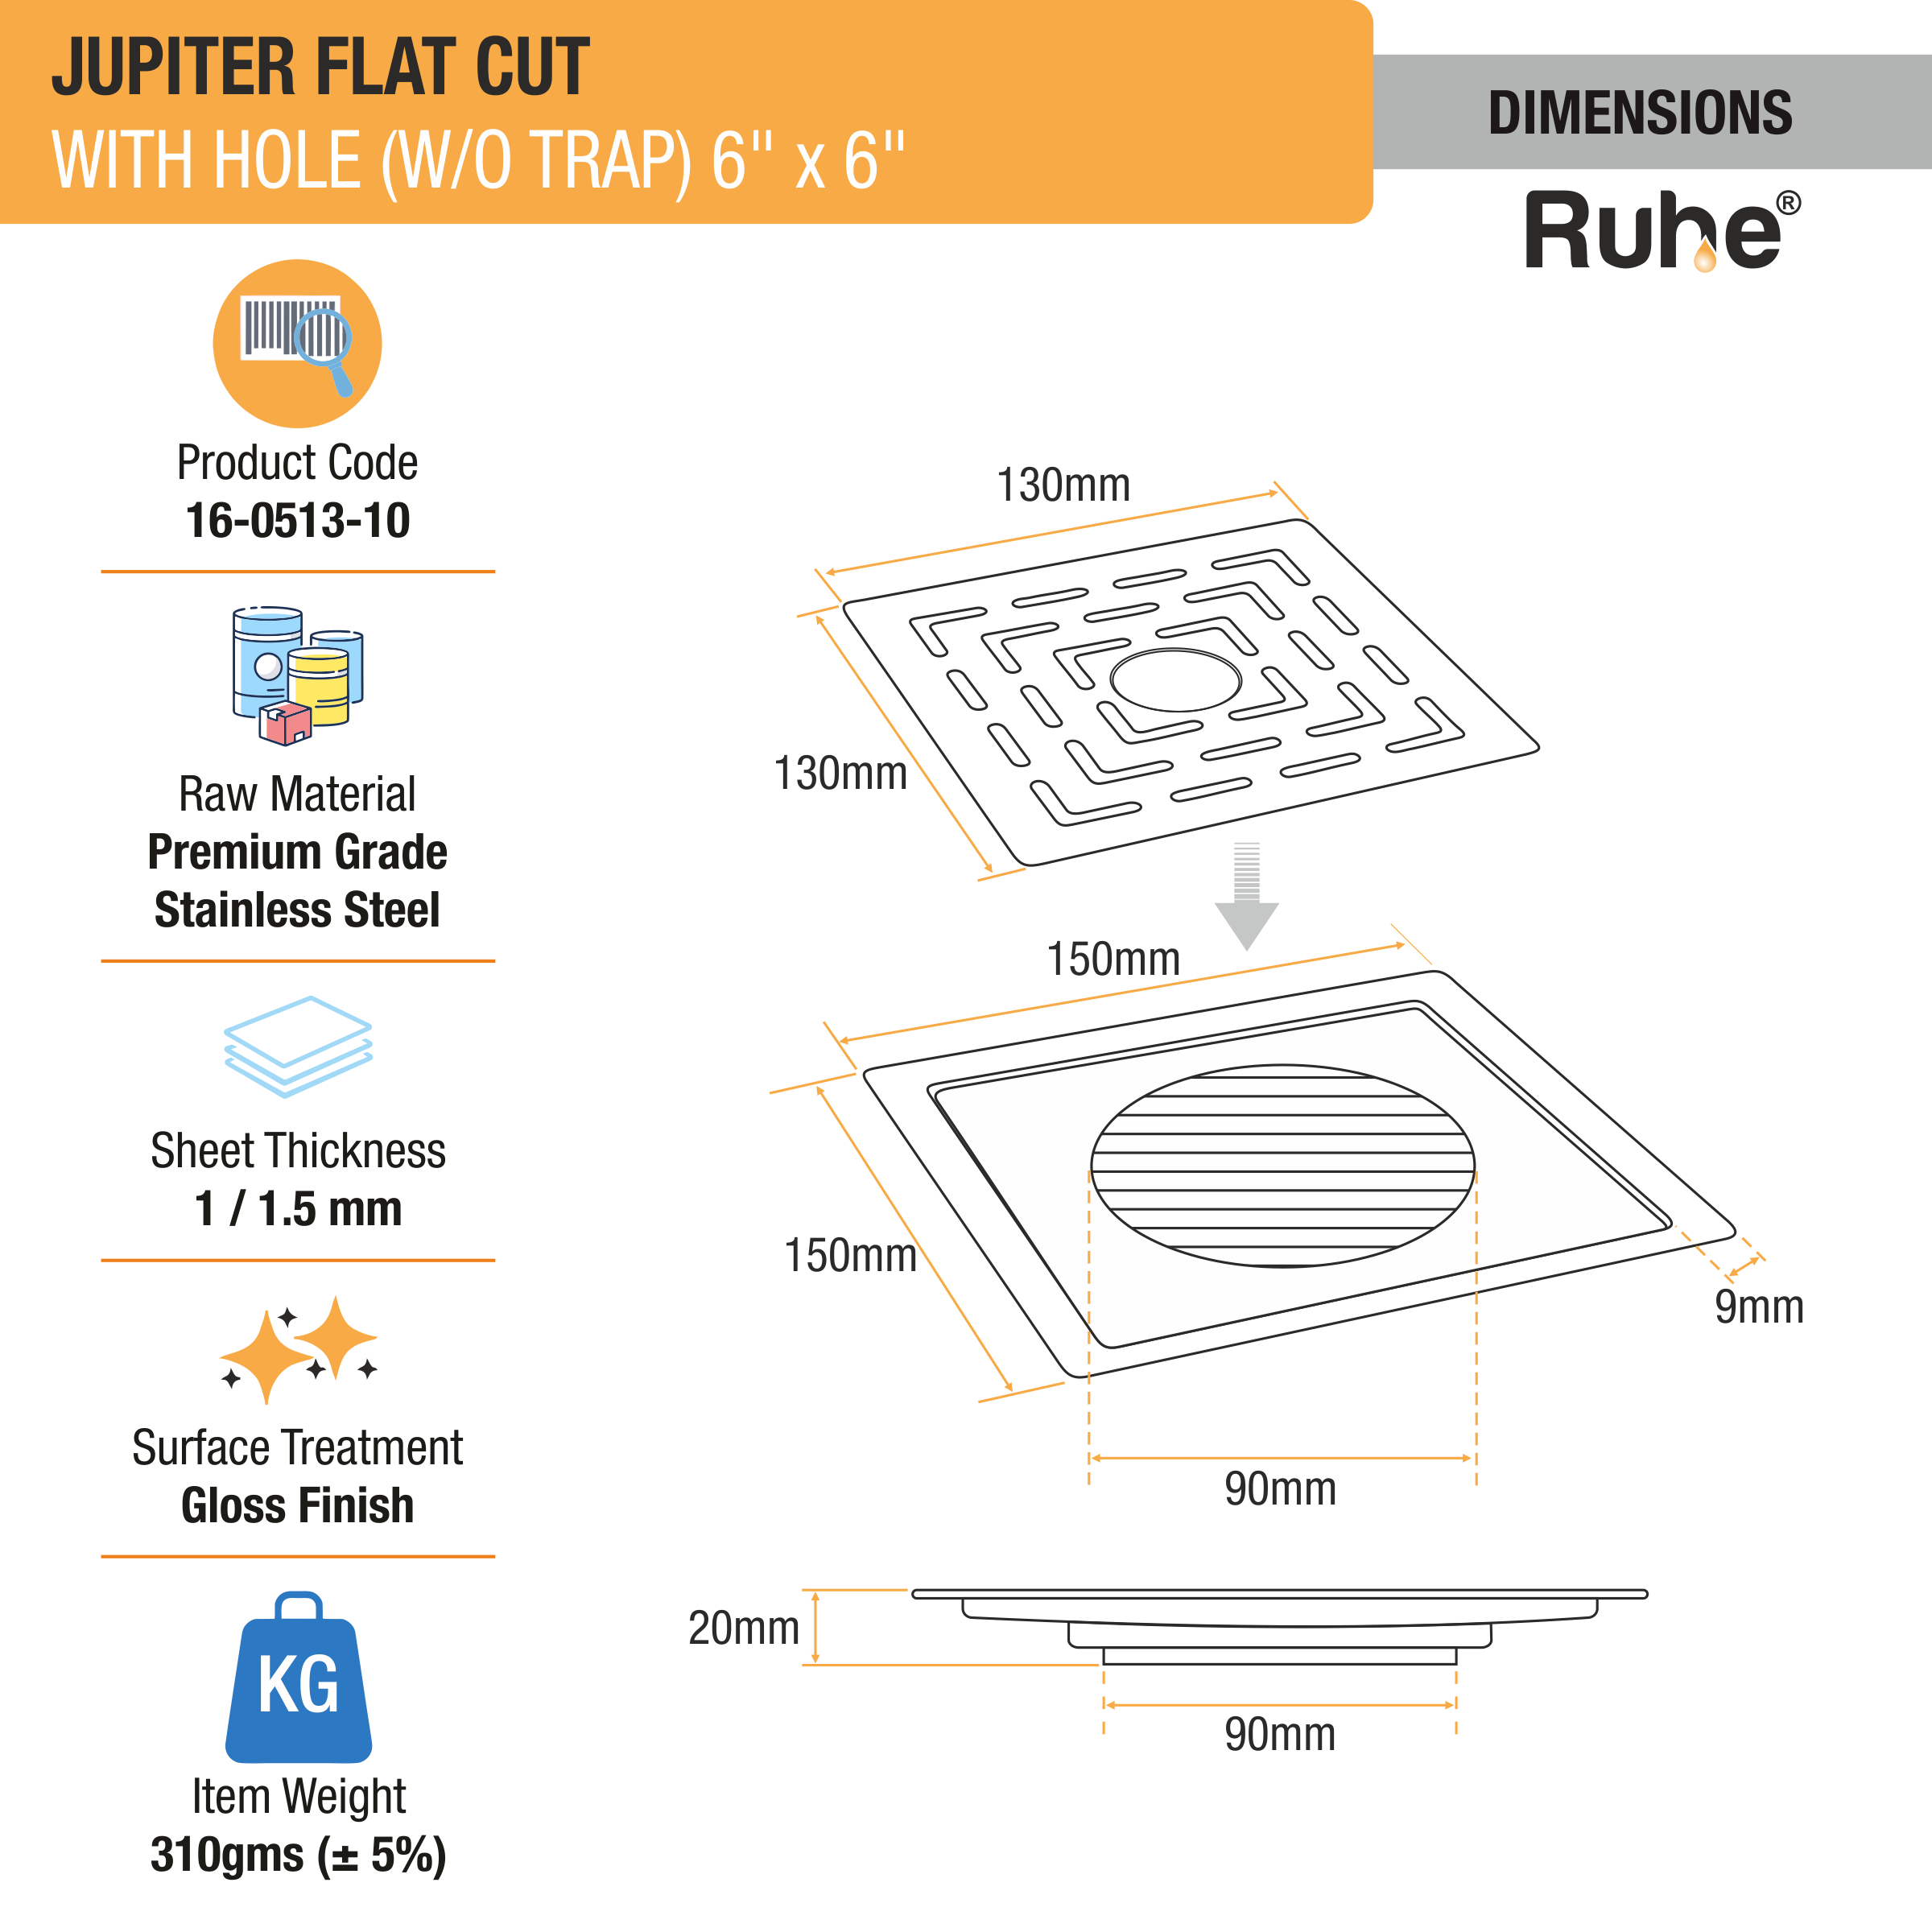 Jupiter Square Premium Flat Cut Floor Drain (6 x 6 Inches) with Hole dimensions and sizes